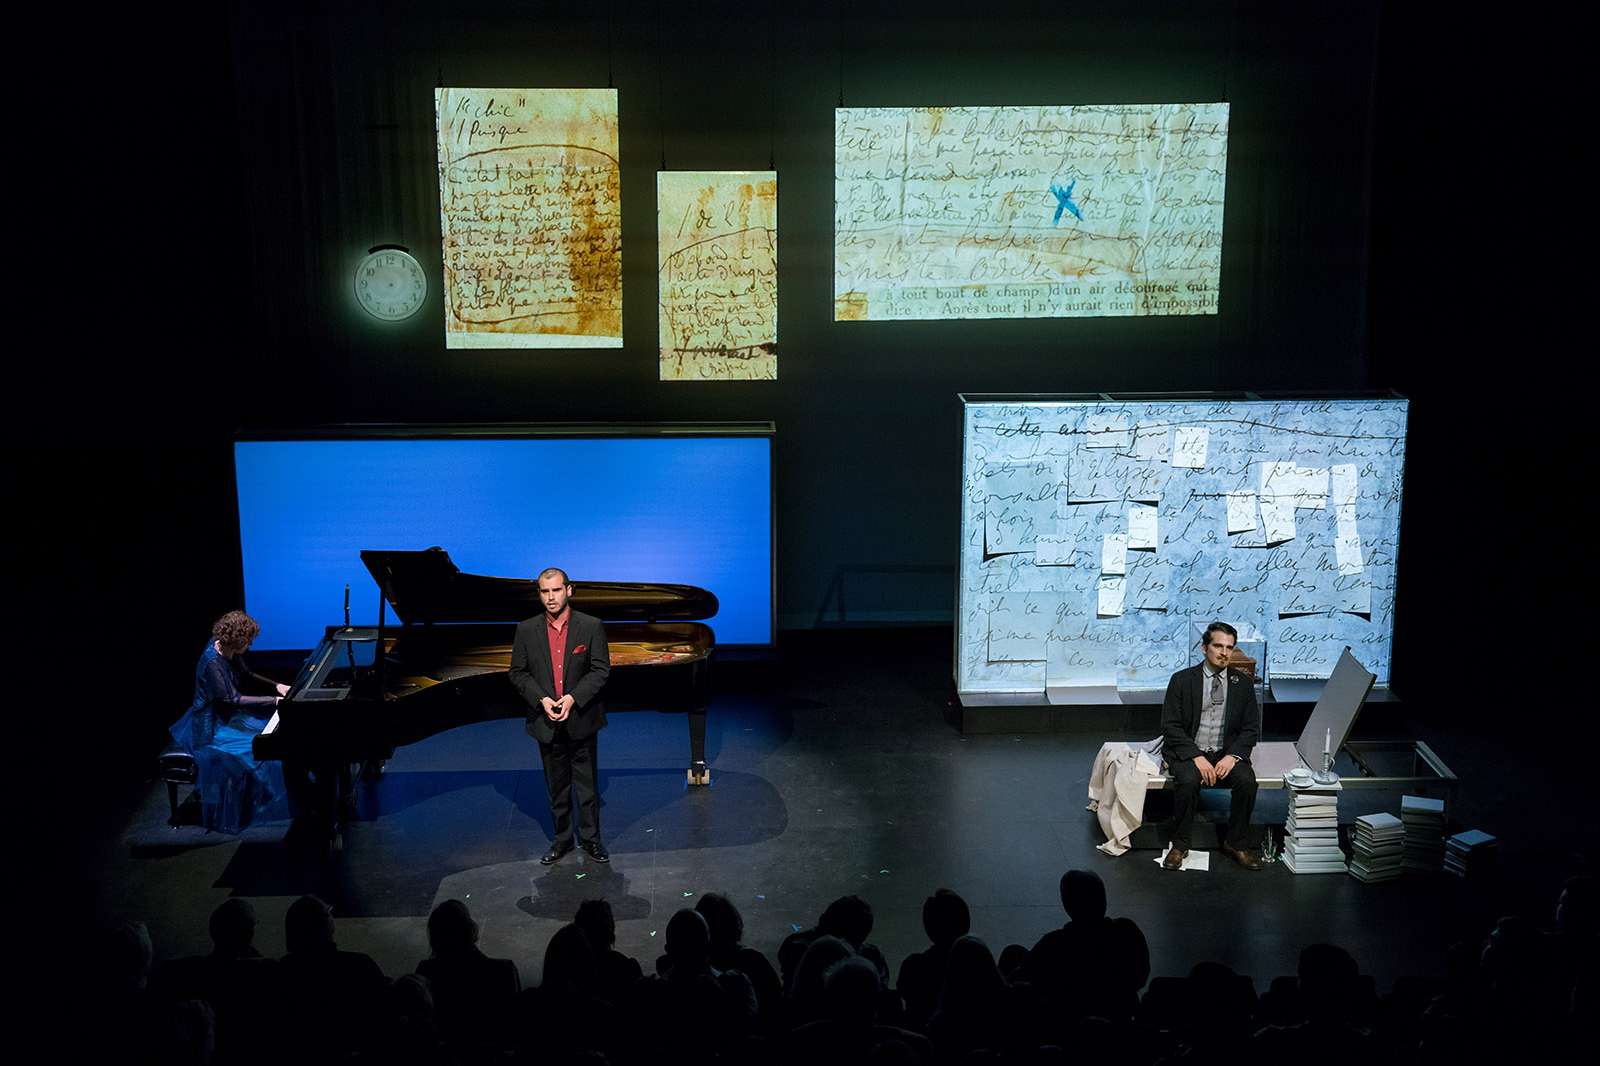 Sarah Rothenberg with Dylan Morrongiello, tenor, Shepherd School of Music, and Carlos Dengler as The Narrator/Marcel in A Proust Sonata. Performance at the Moody Center for the Arts’ Lois Chiles Studio Theater at Rice University, 2017. Photo: Ben Doyle